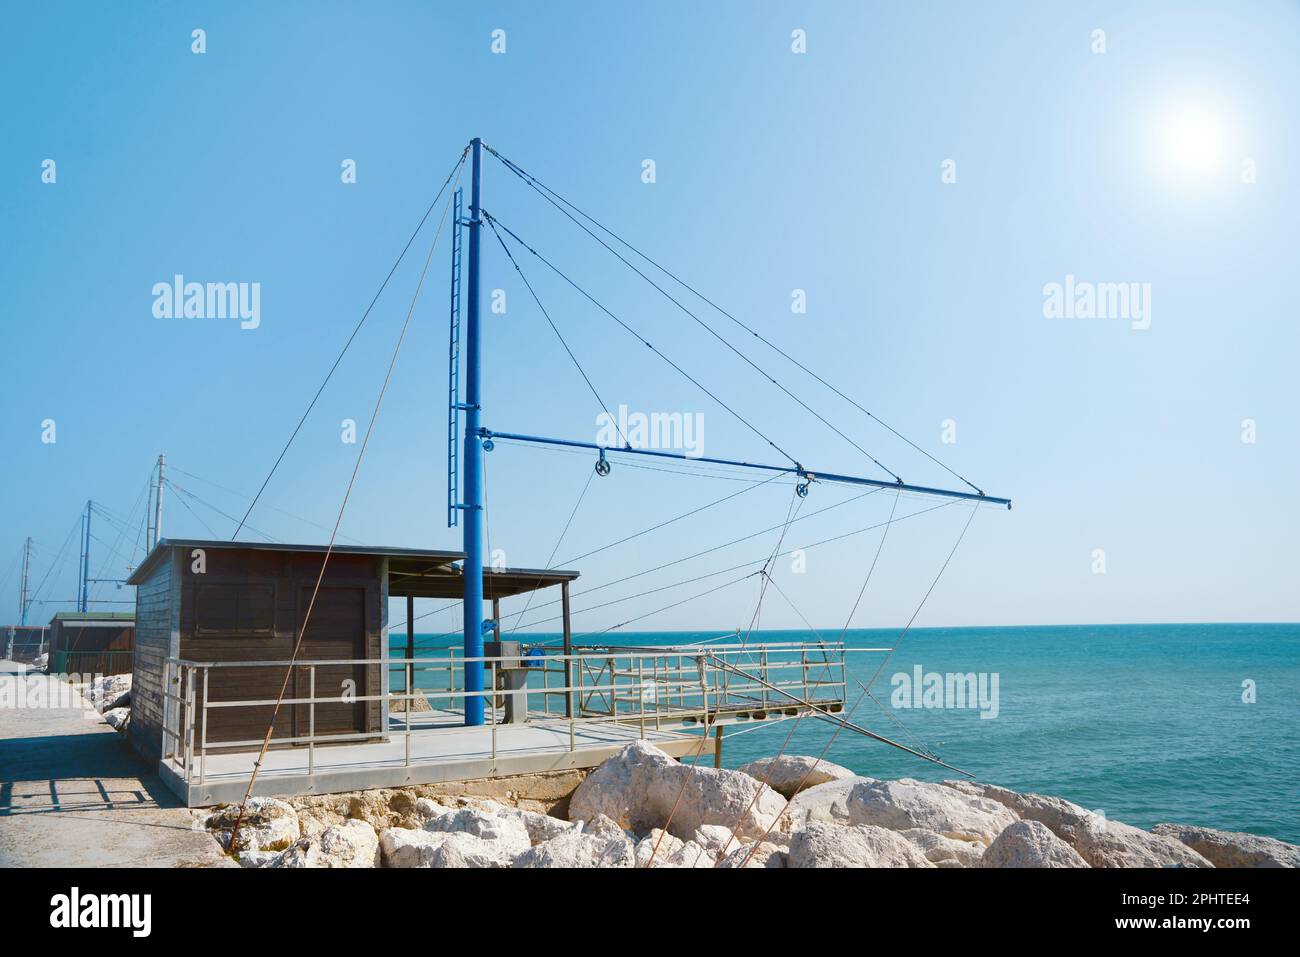 81 Shore Operate Lift Net Images, Stock Photos, 3D objects